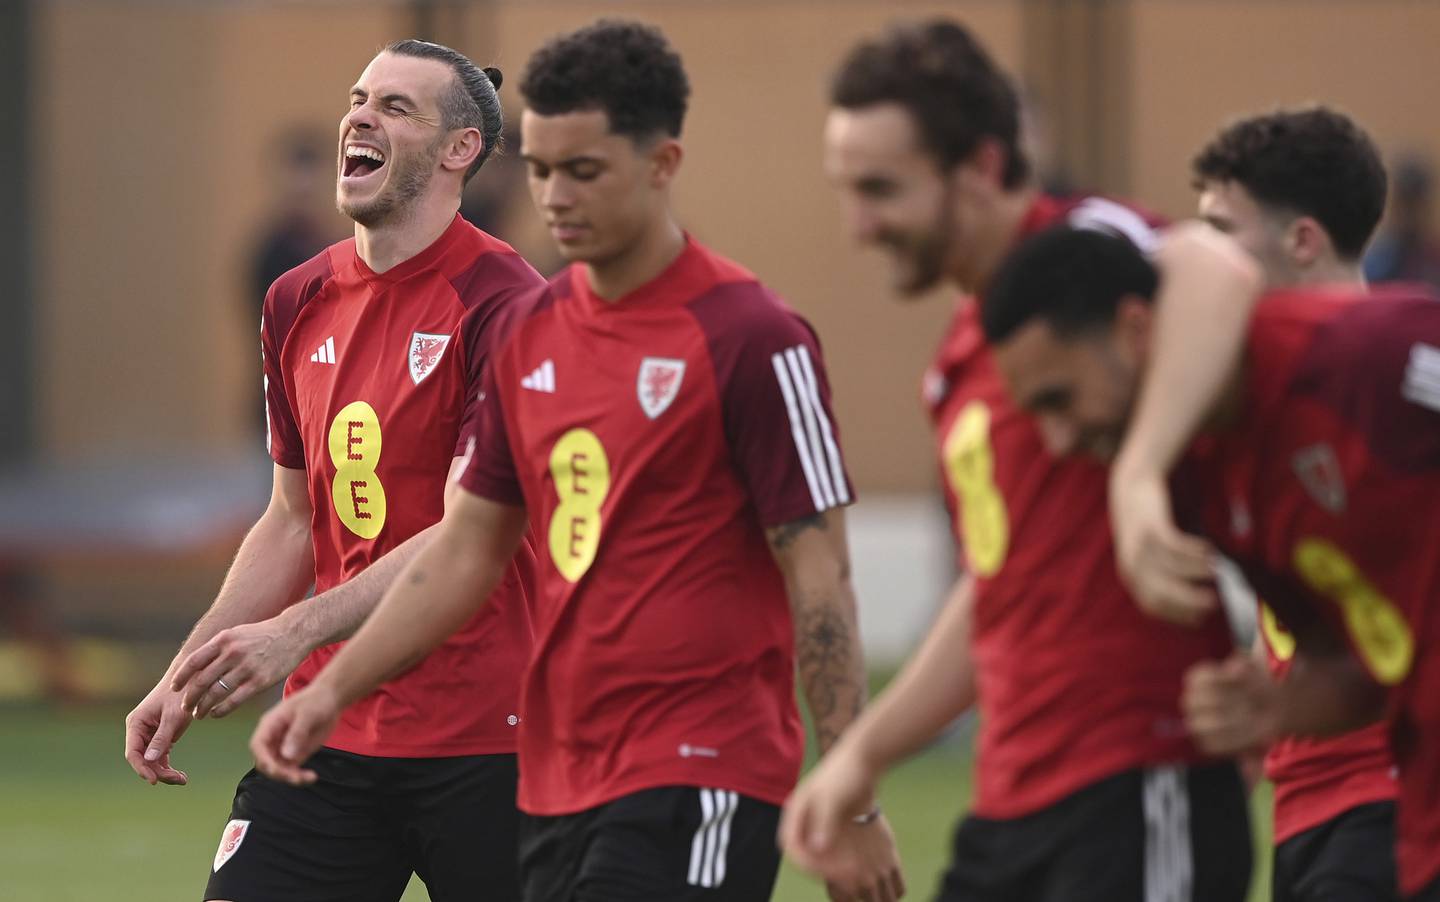 Wales captain Gareth Bale, left, shares a joke with team mates  during the Wales Training Session at Al Sad Sports Club on Nov. 17, 2022 in Doha, Qatar. 